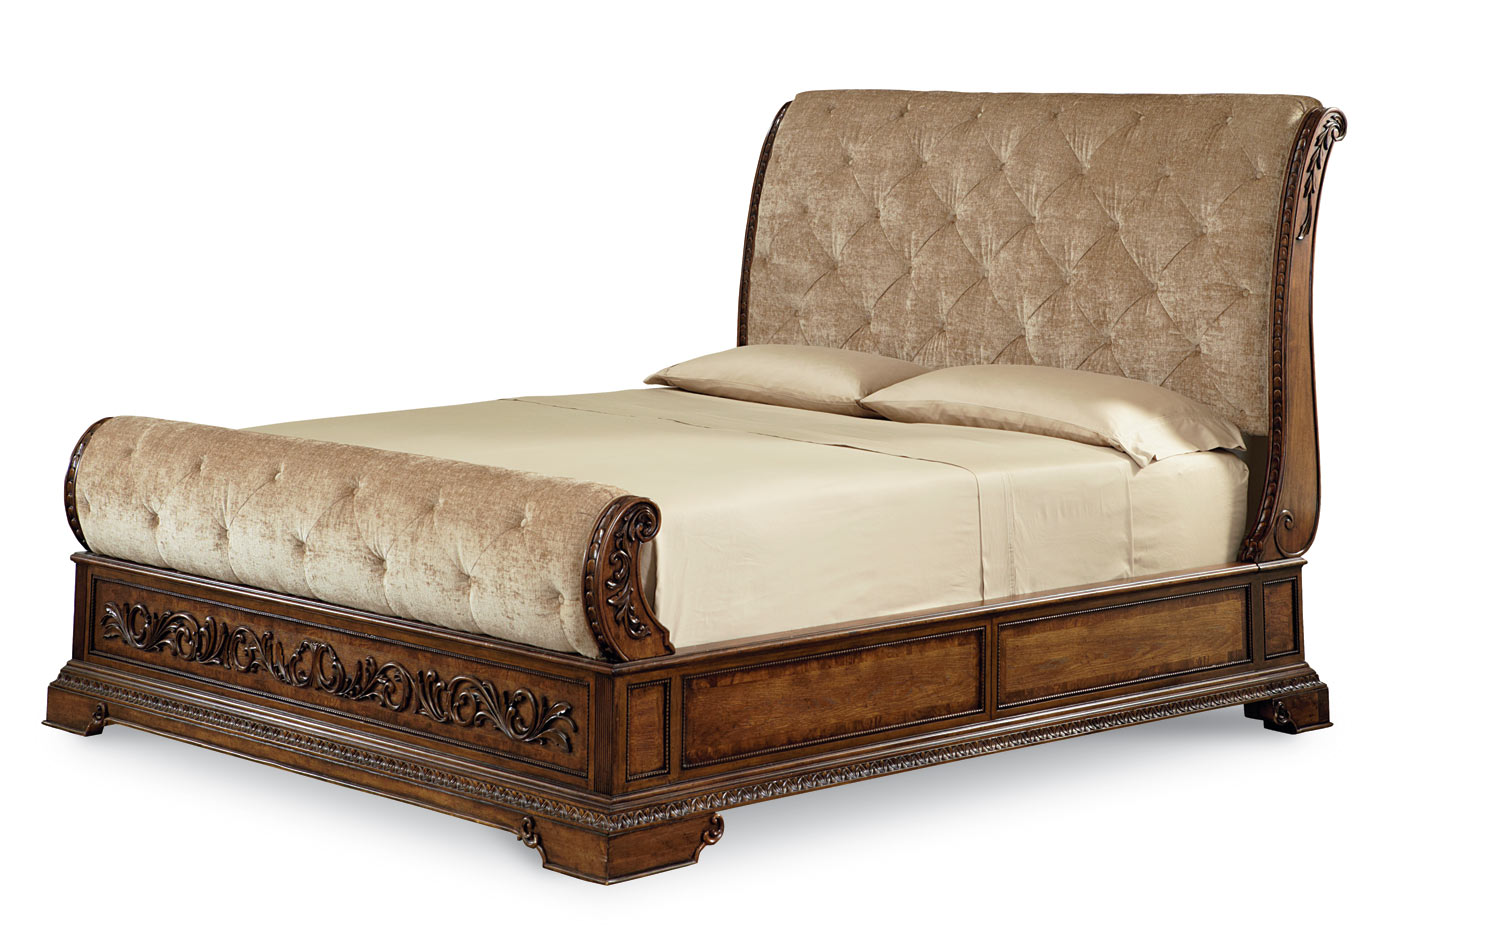 Legacy Classic Pemberleigh Upholstered Sleigh Bed - Brandy/Burnished Edges